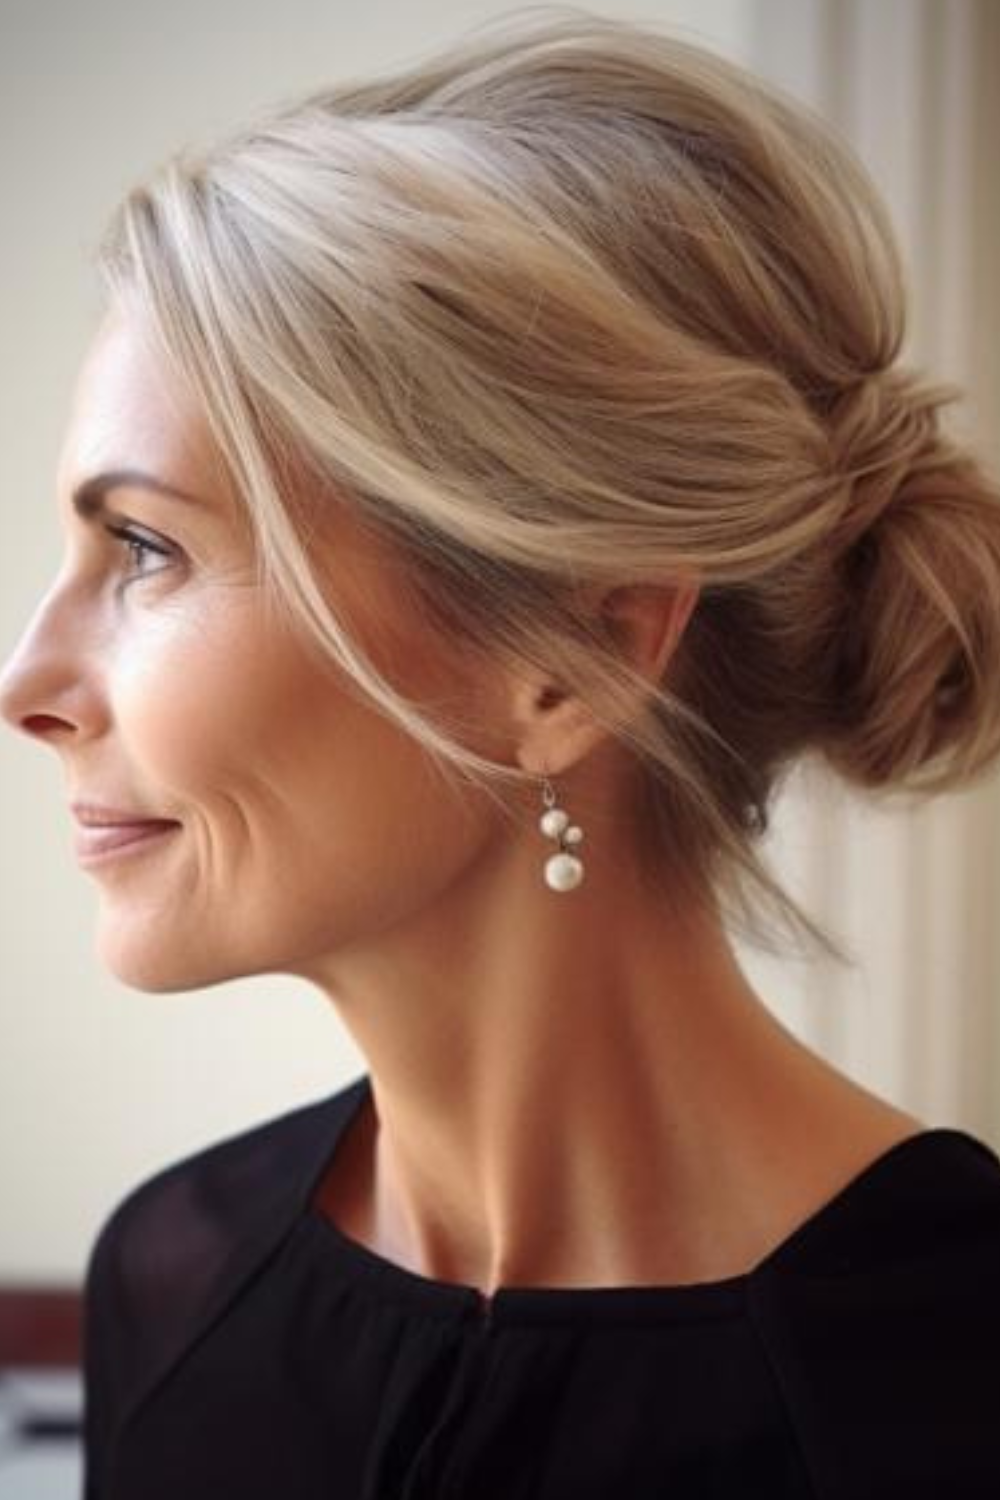 Chic and Timeless: Hairstyles for Older Women That Never Go Out of Style